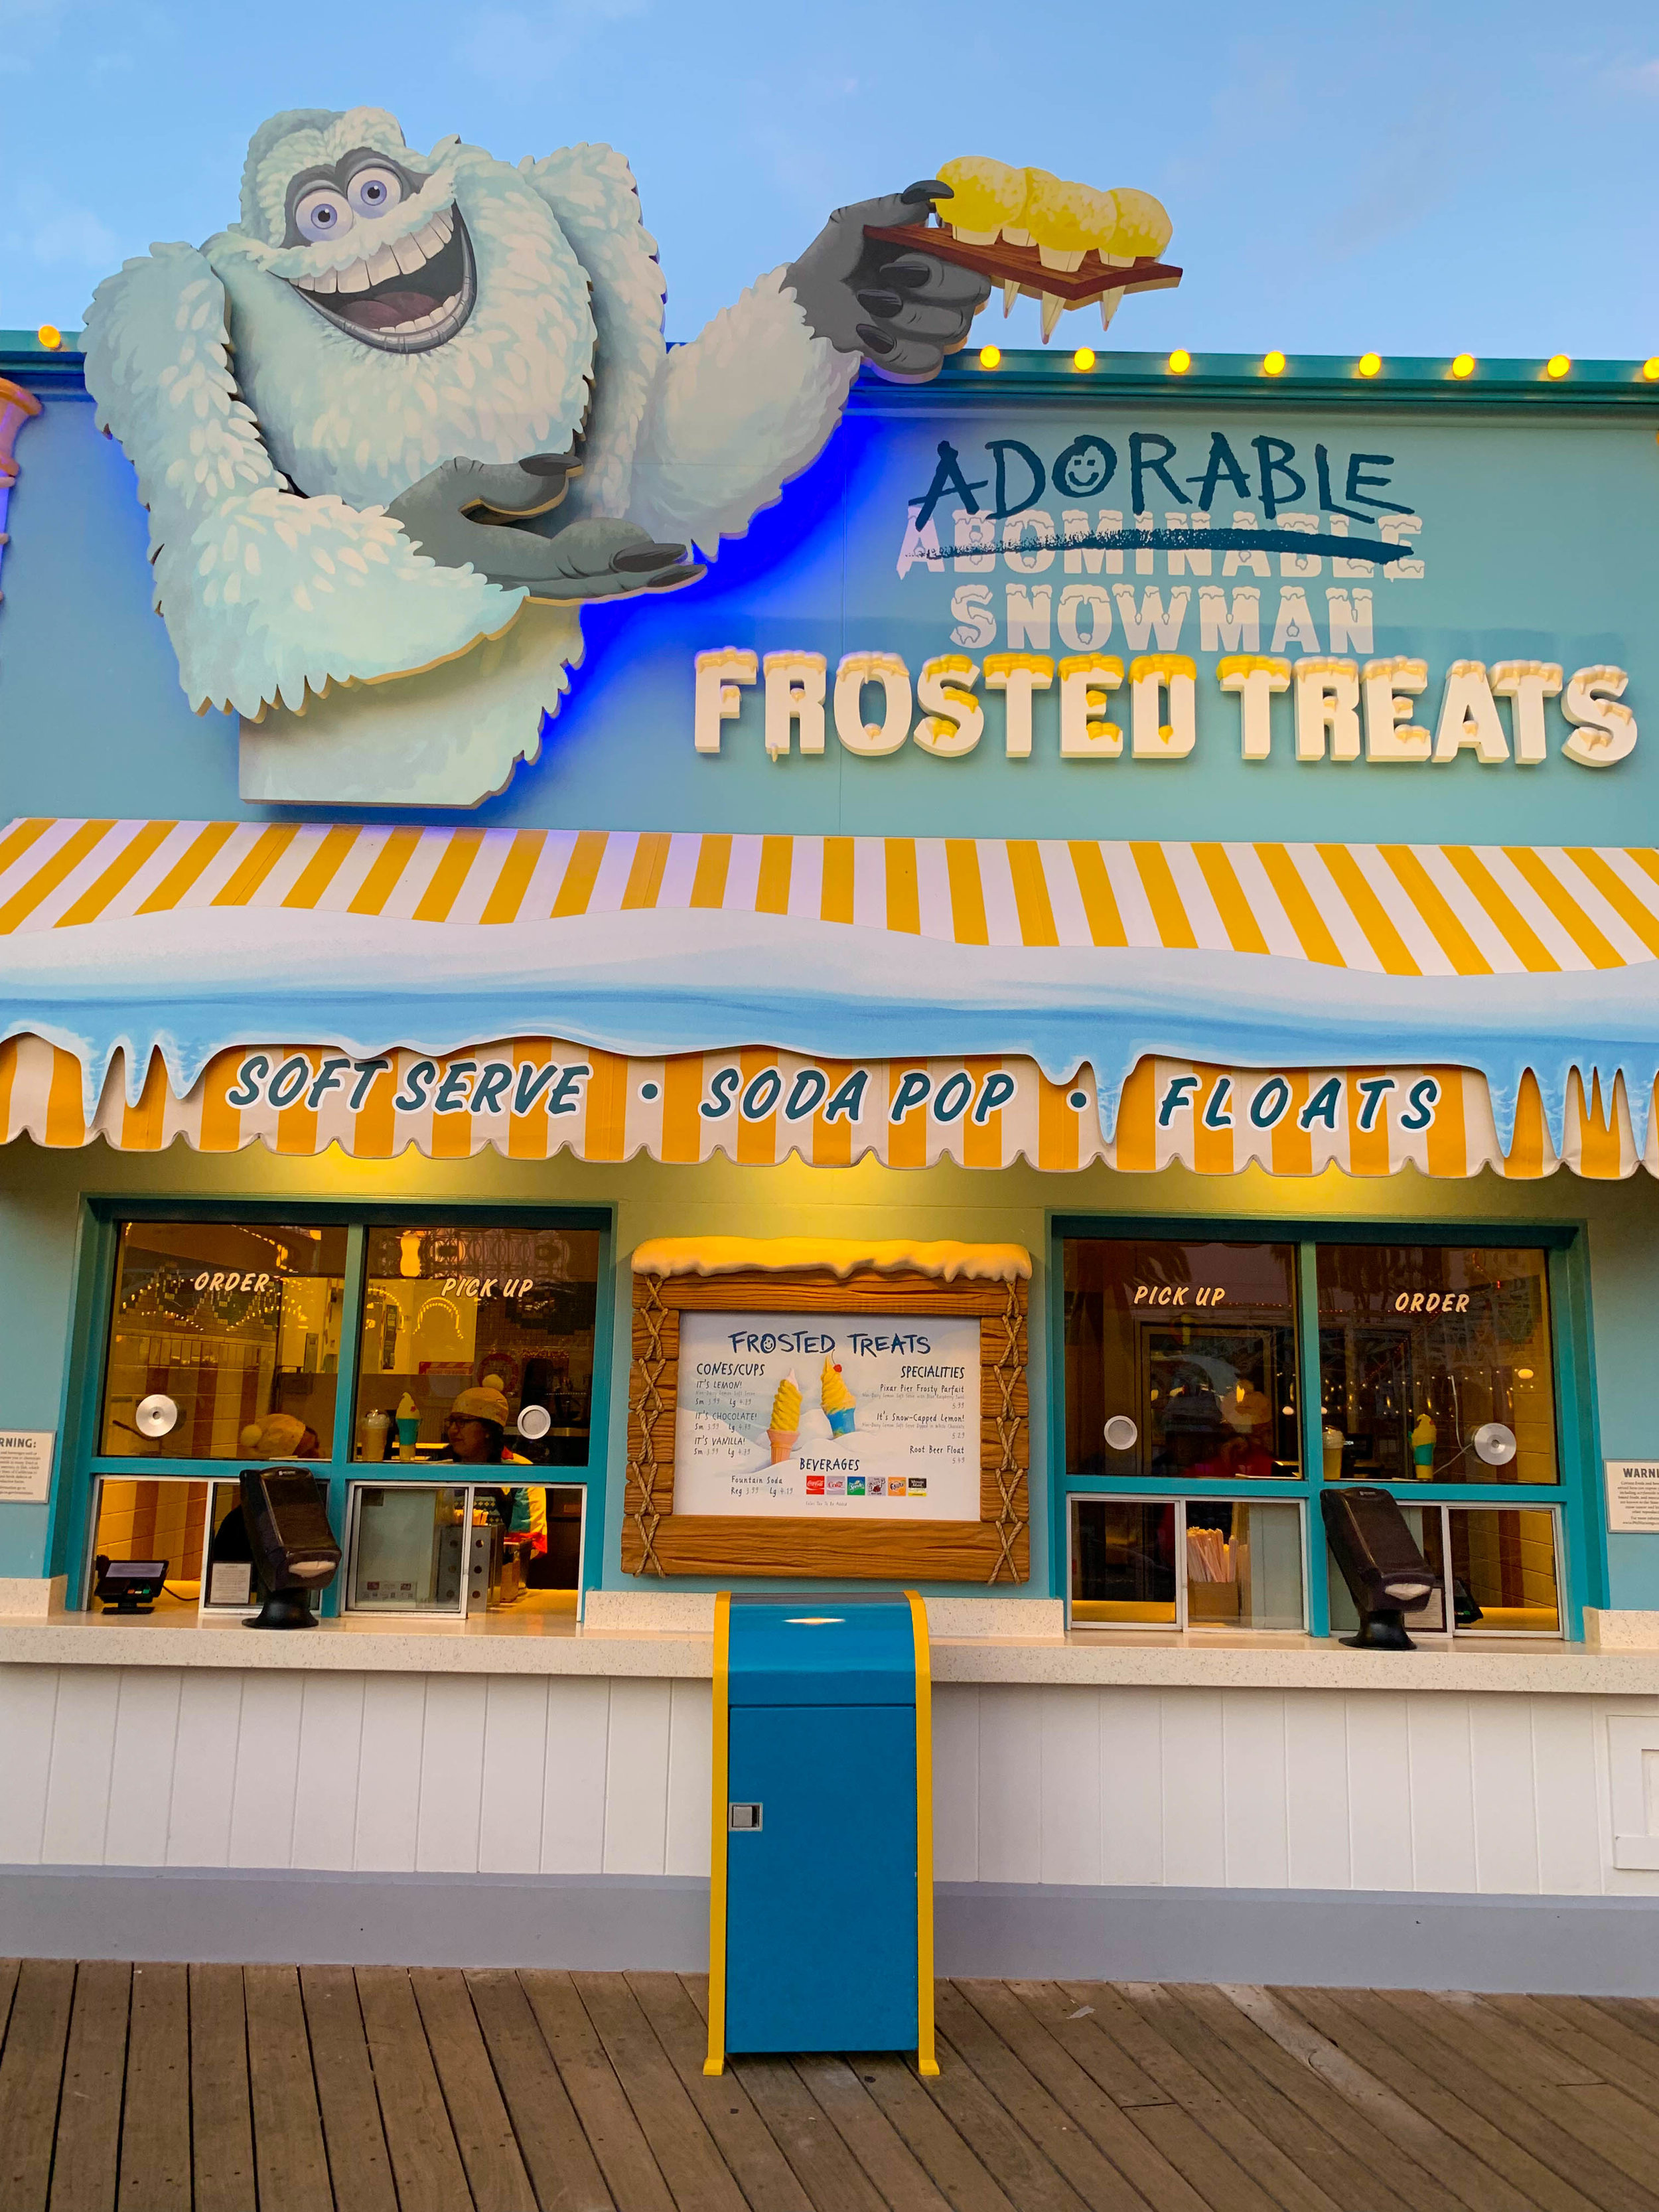 Adorable Snowman Frosted Treats (Copy)